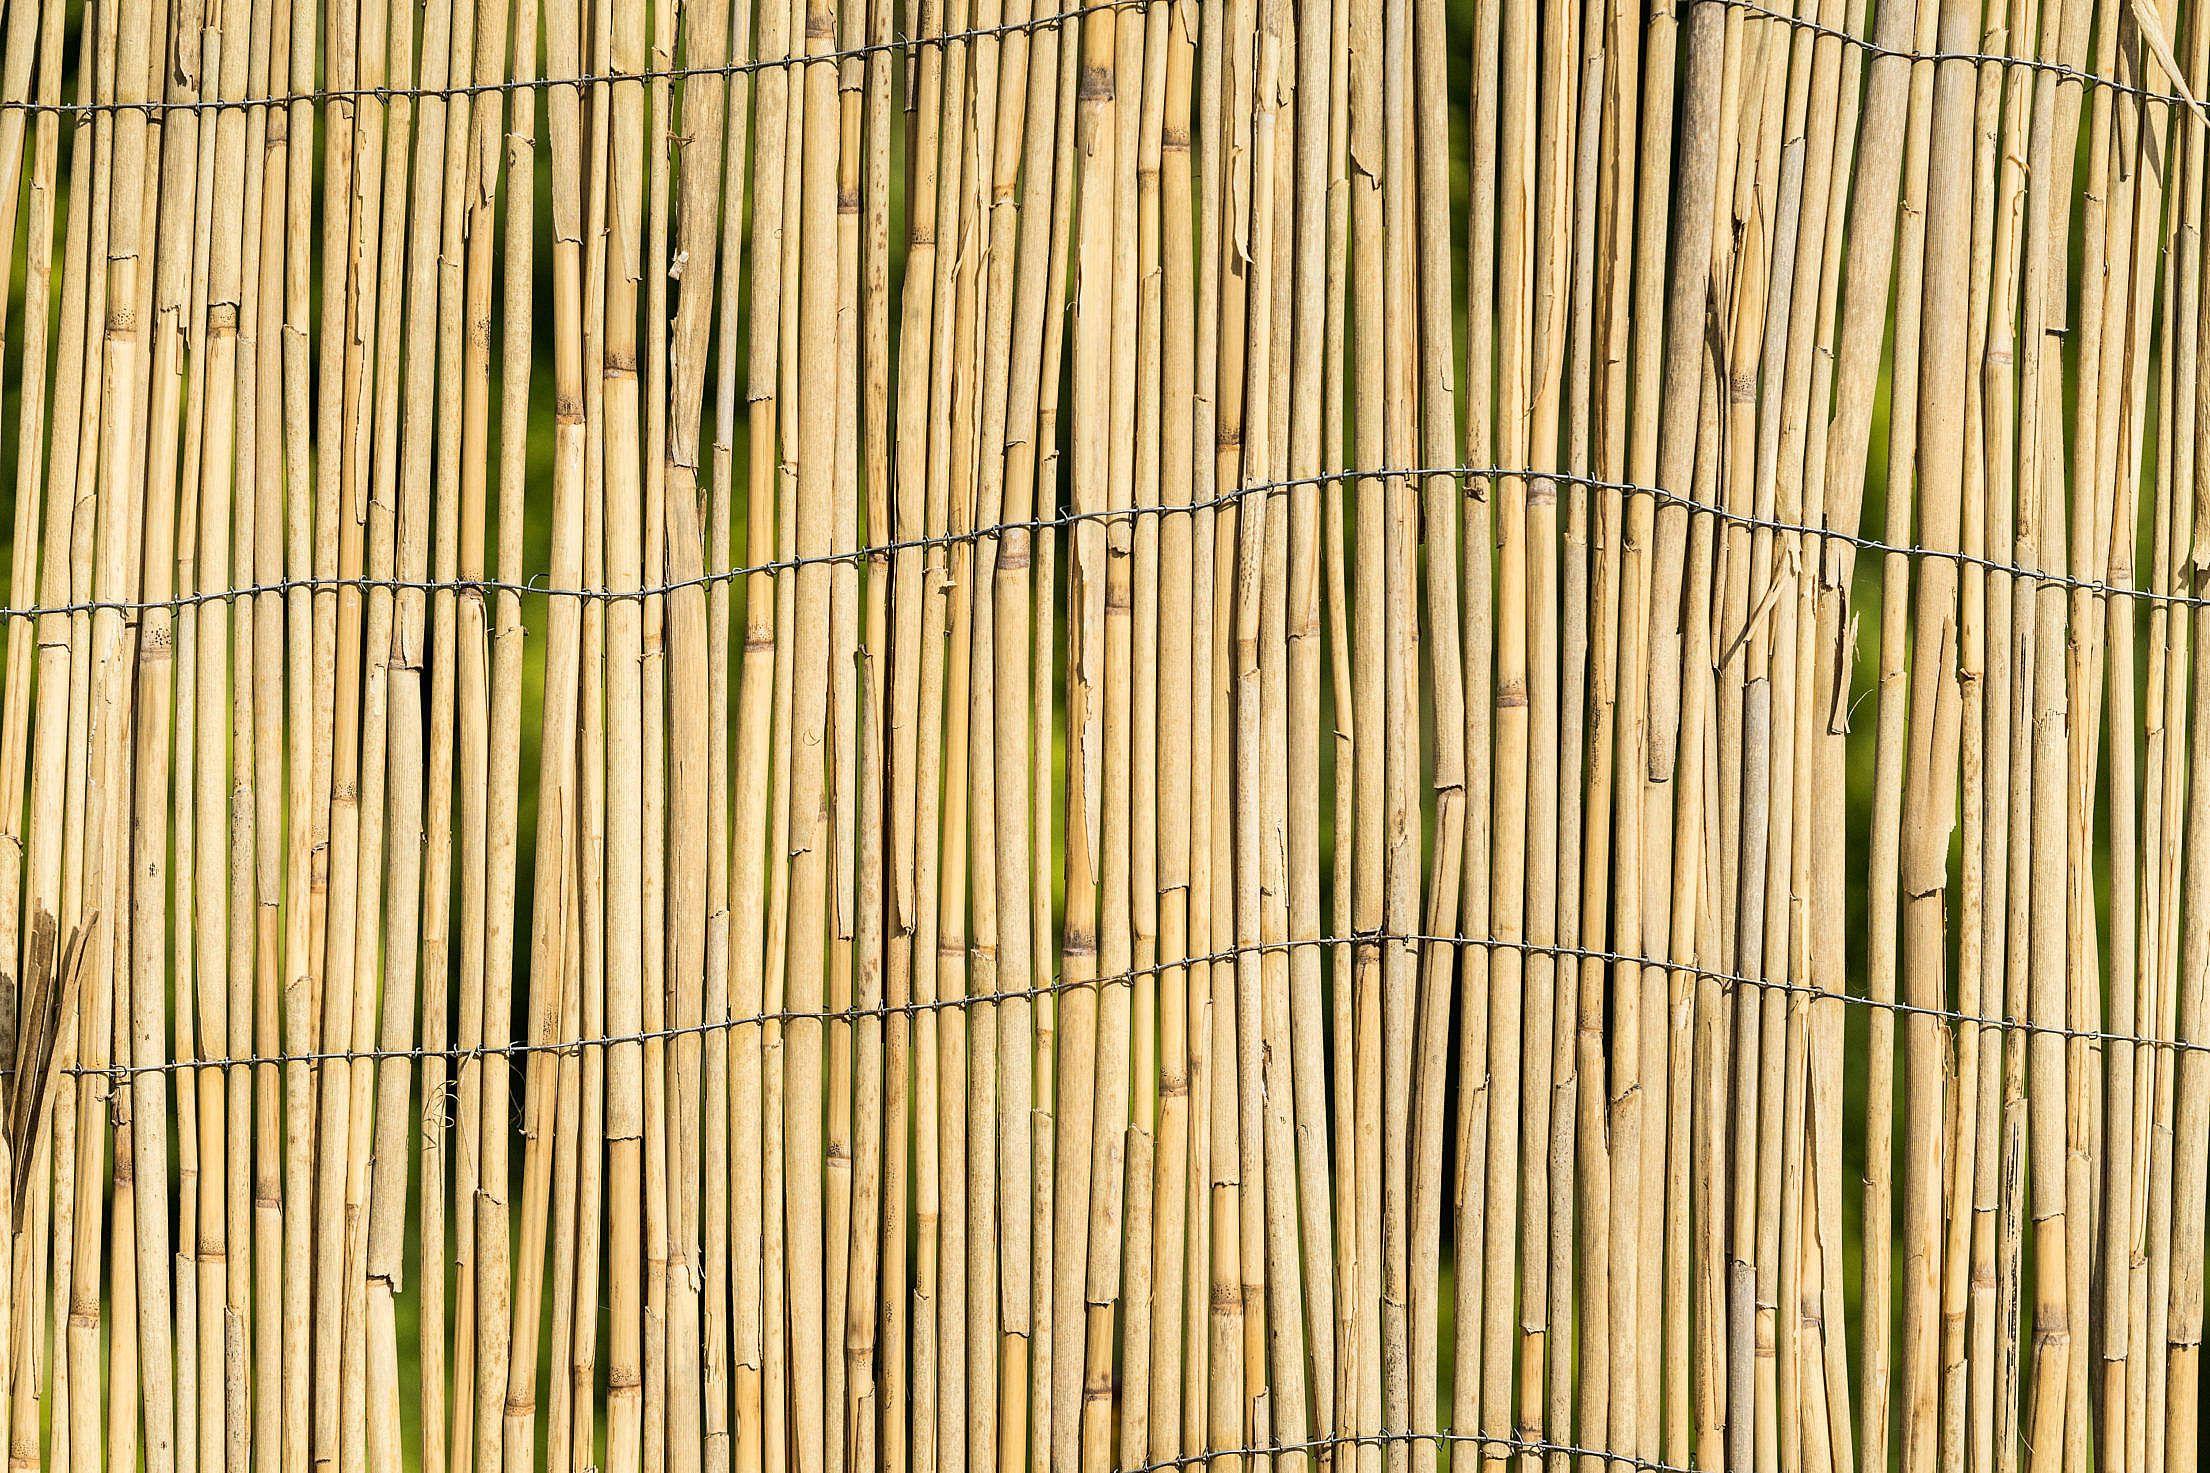 Garden Bamboo Wall Fence Texture Background Free Photo Download